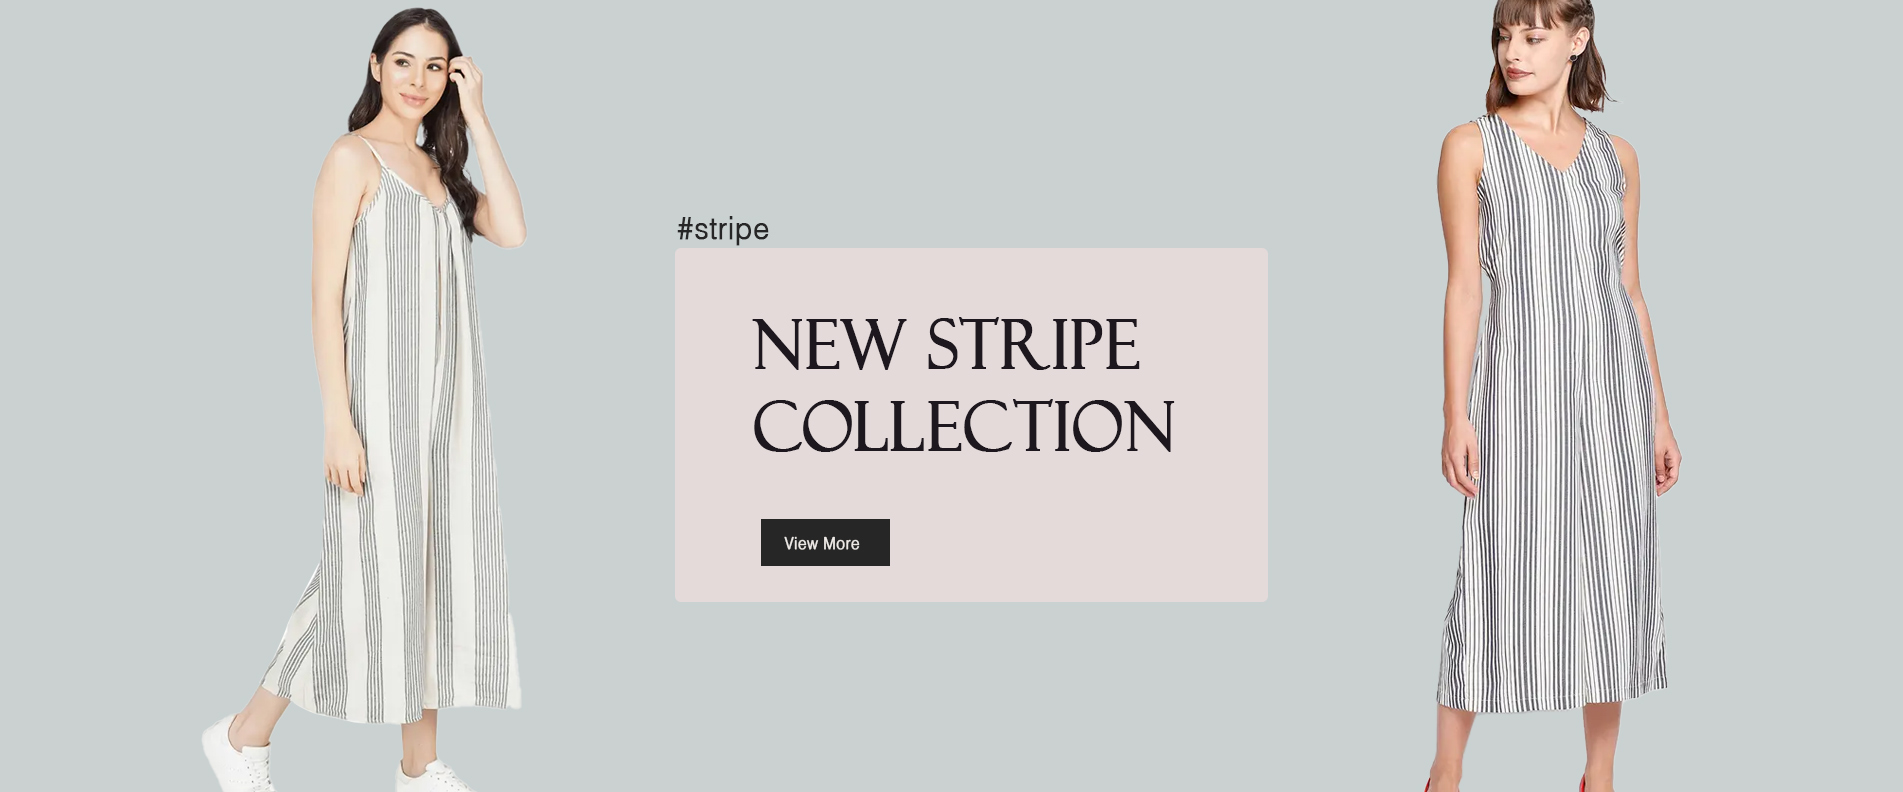 New Stripe Collection